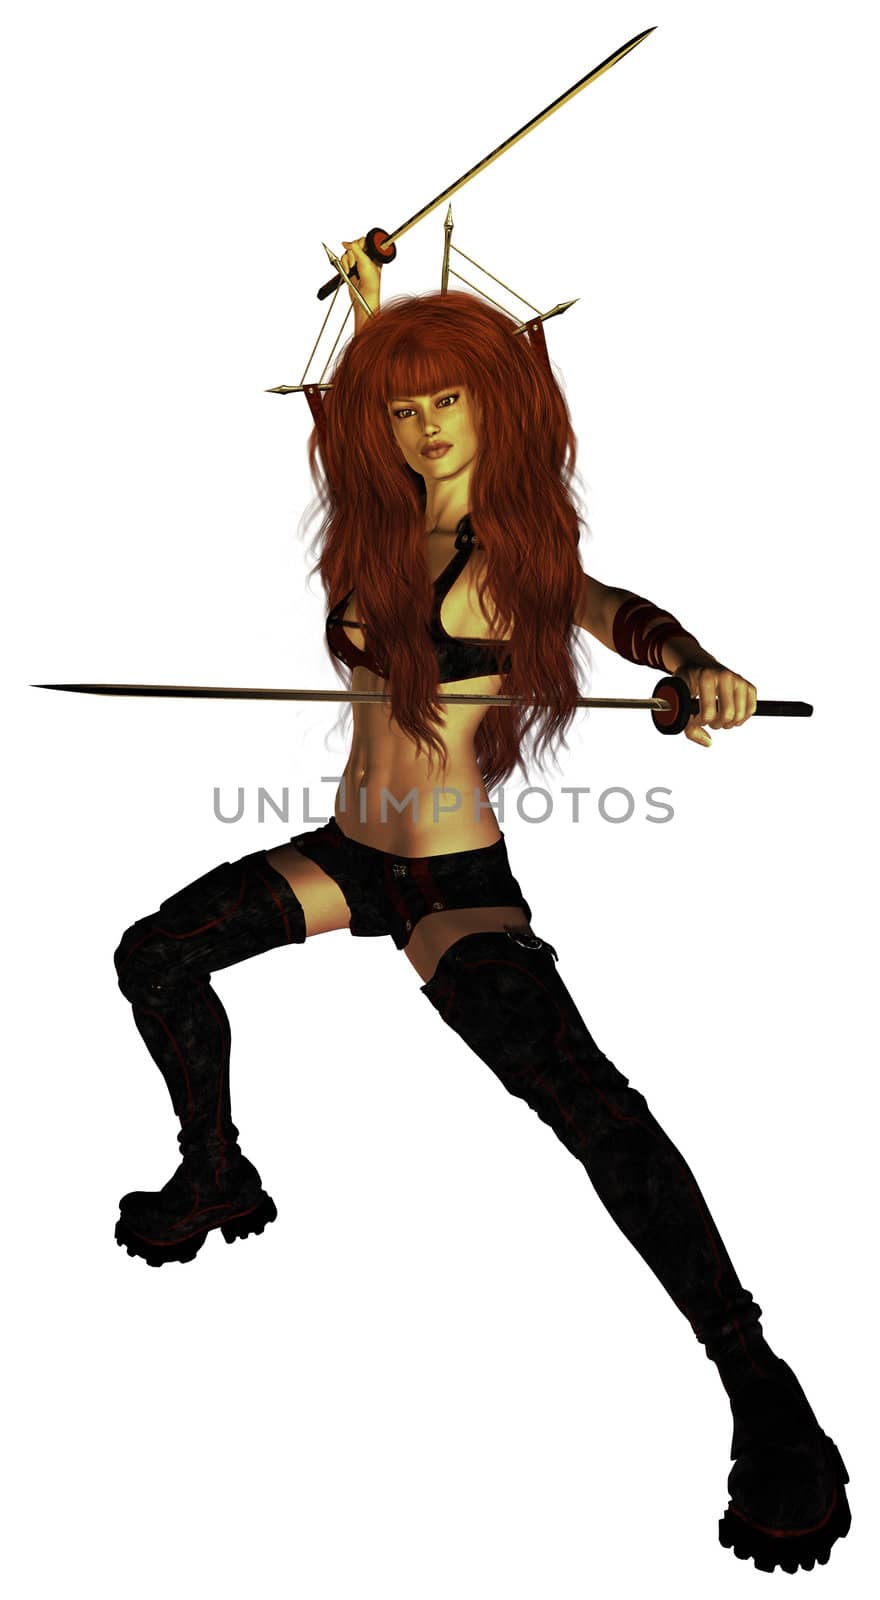 Woman Holding Swords by kathygold